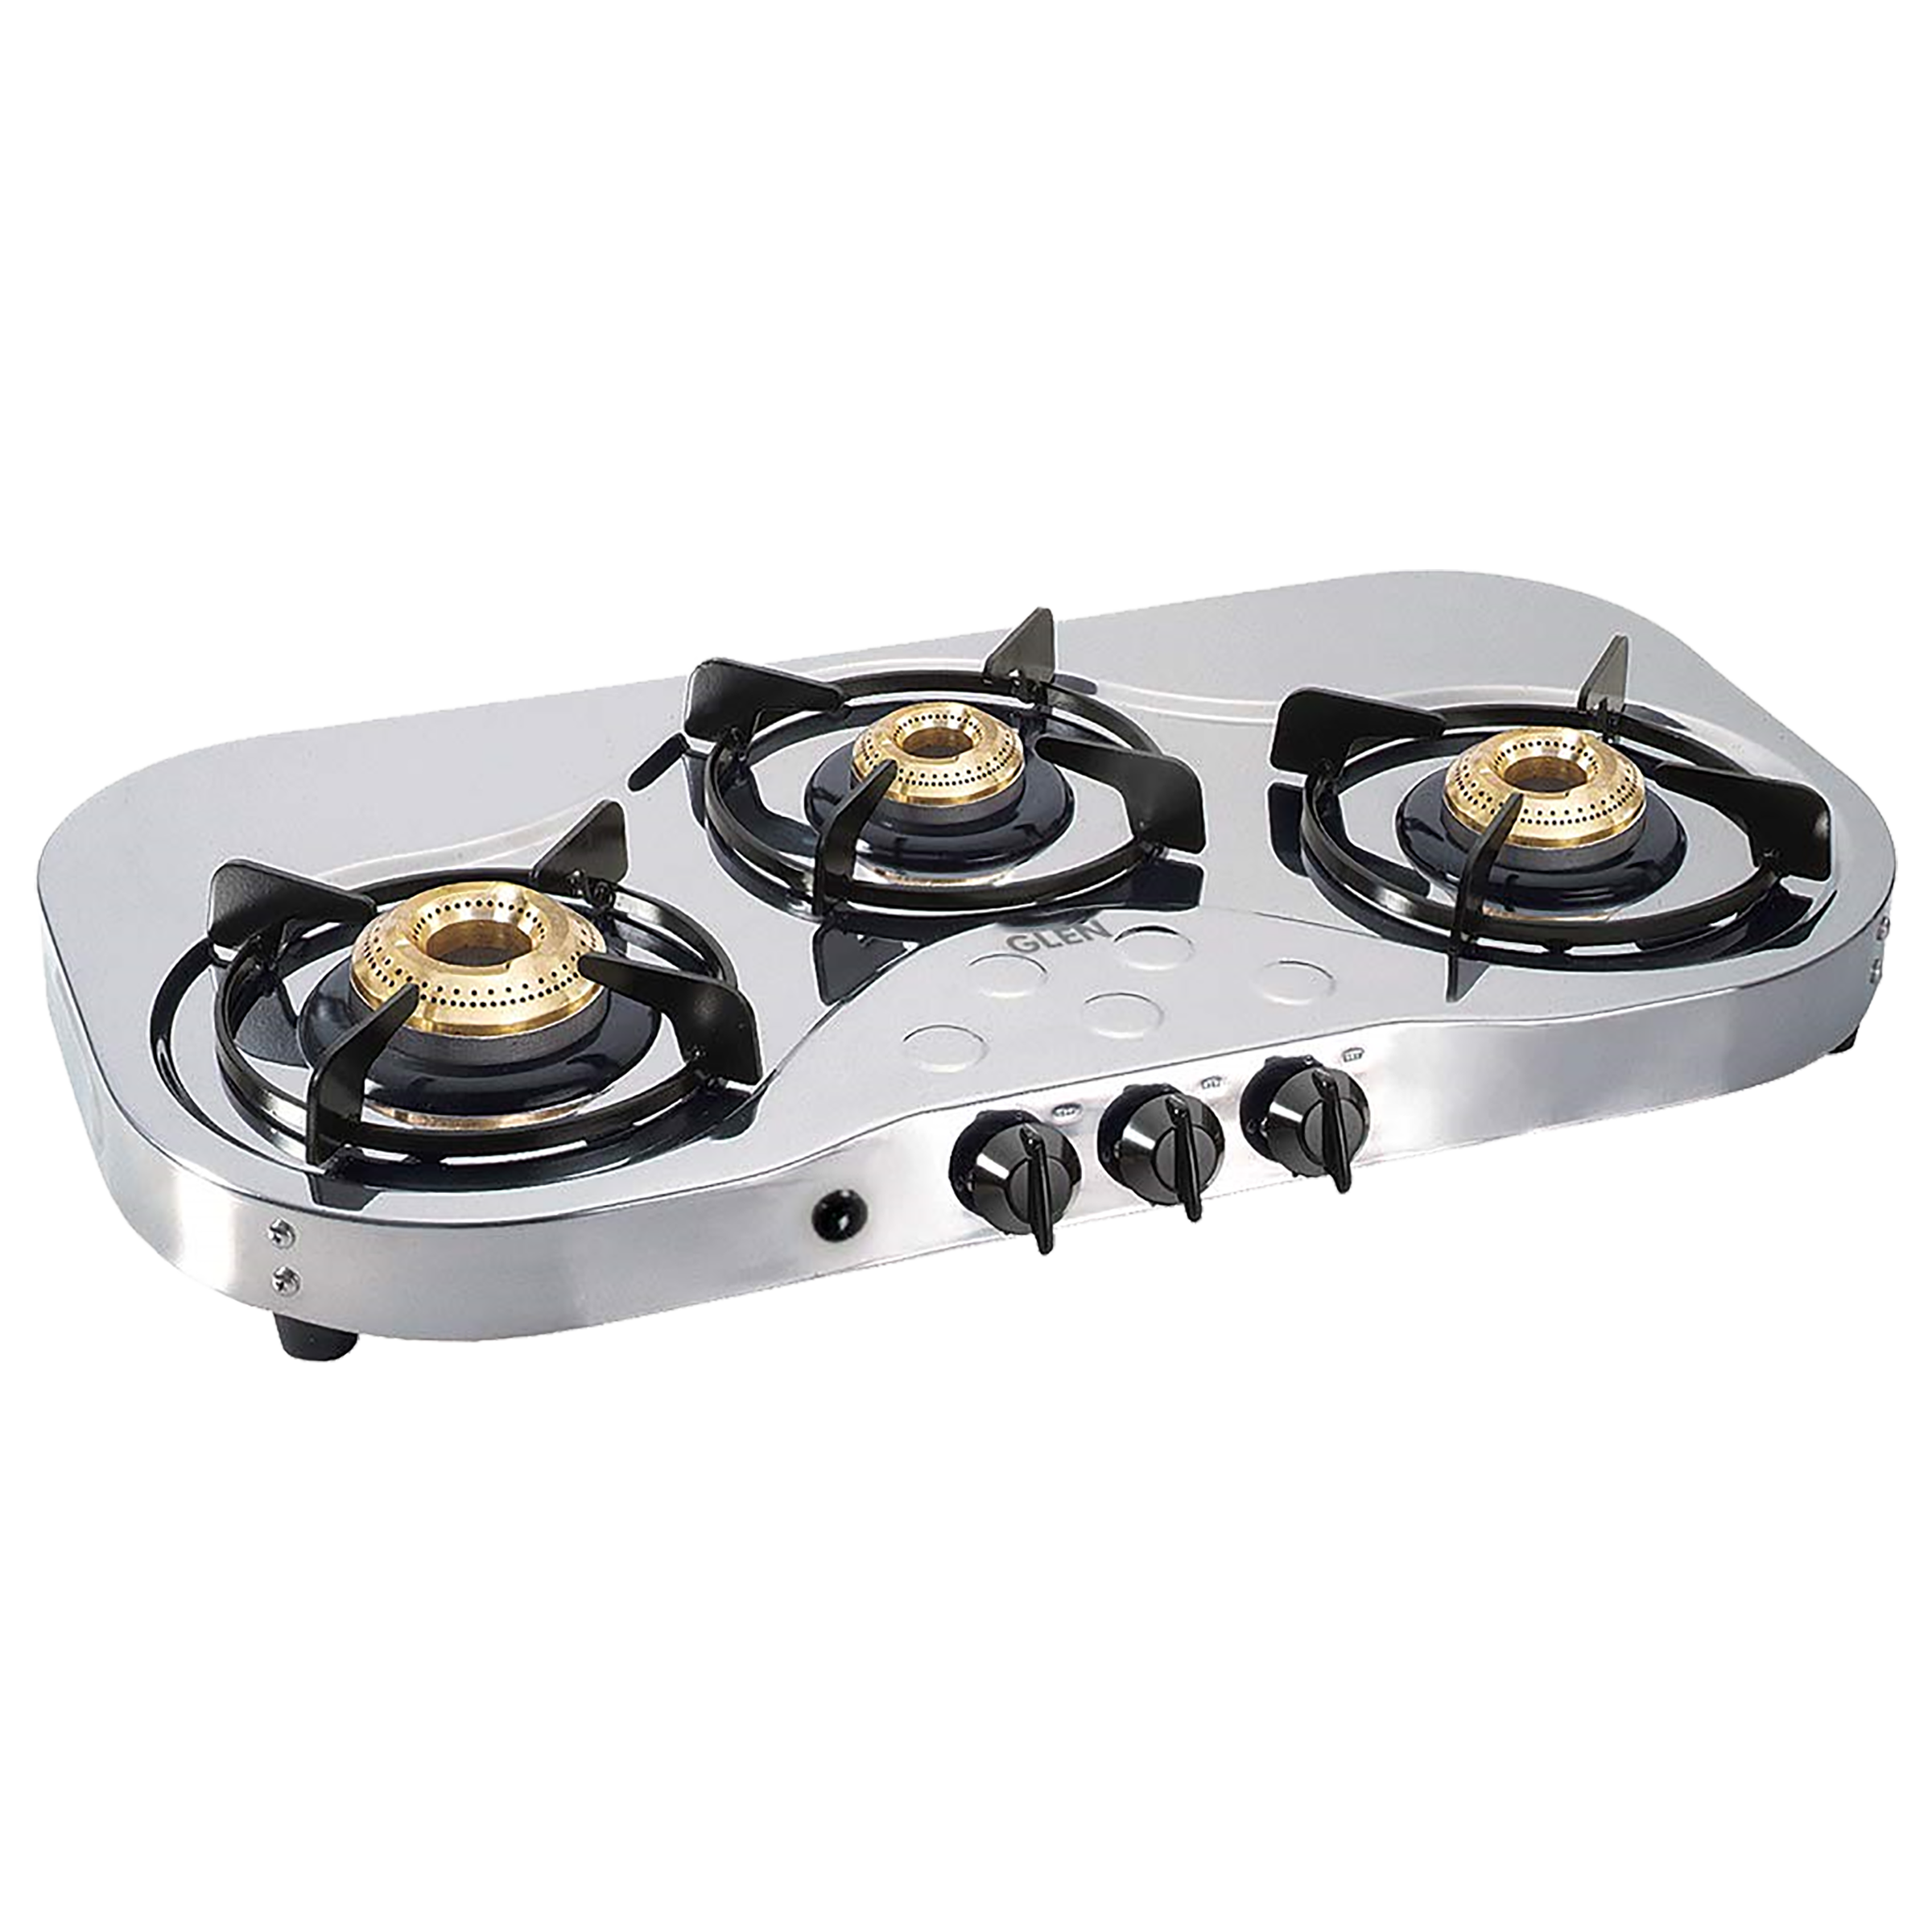 Glen CT1035SSHFBBAI 3 Burner Stainless Steel Gas Stove (Multi Spark Auto Ignition, Silver)_1